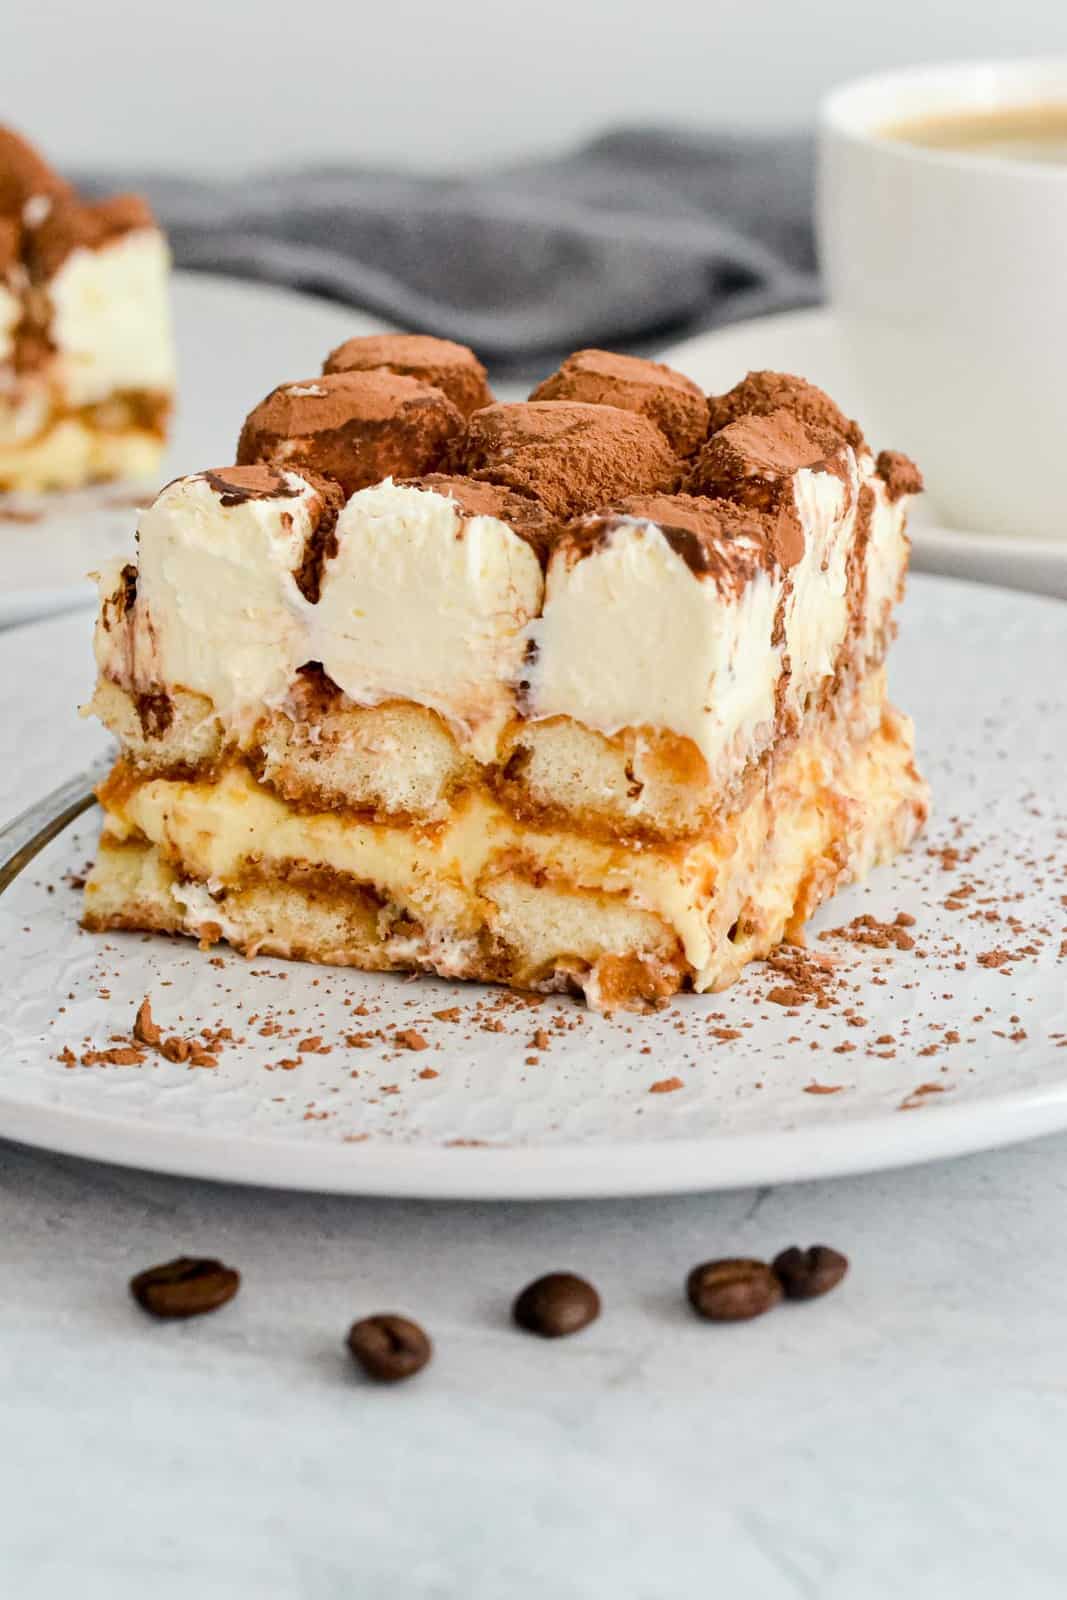 A piece of tiramisu on a plate with cocoa beans next to it.